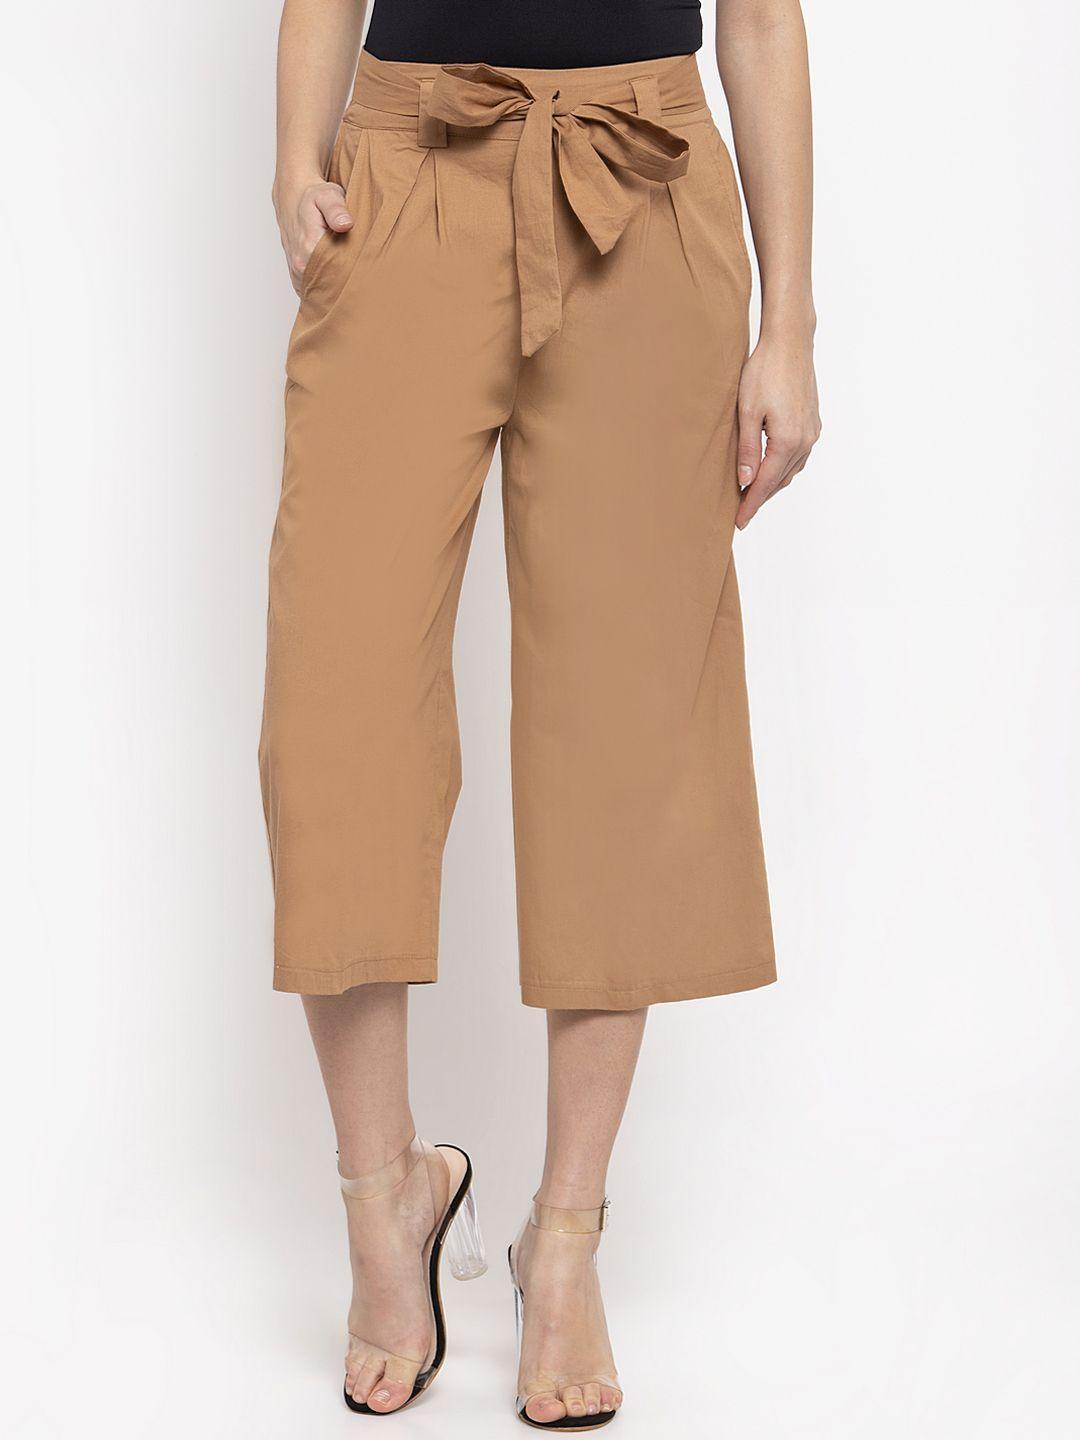 kassually women brown regular fit solid culottes